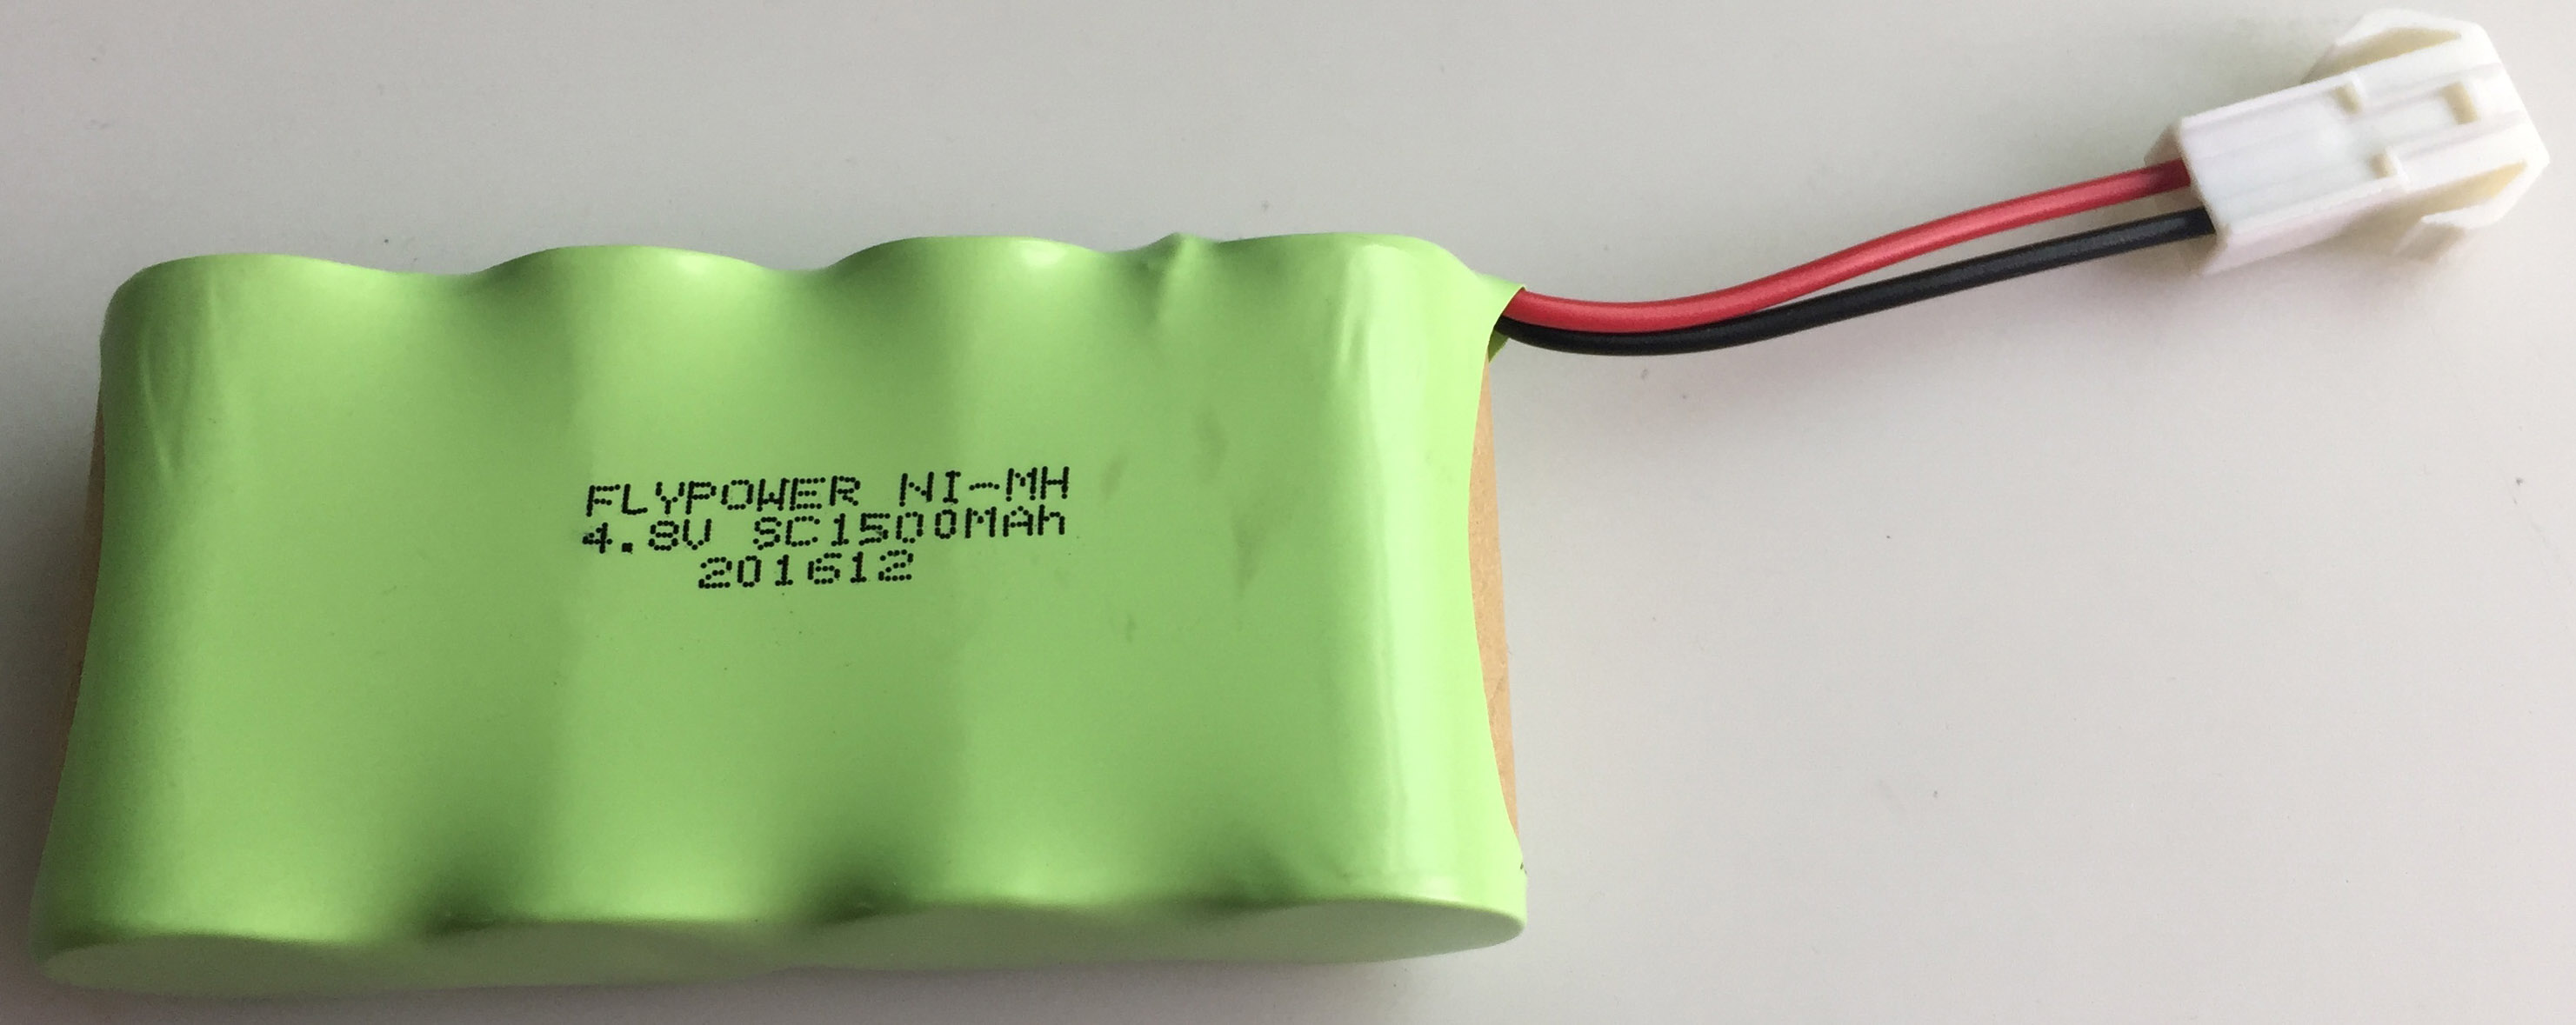 4.8V SC1500mAh Ni-MH High Power Rechargeable Battery Pack for Portable Vacuum Cleaner (4S of FH-SC1500VK) 